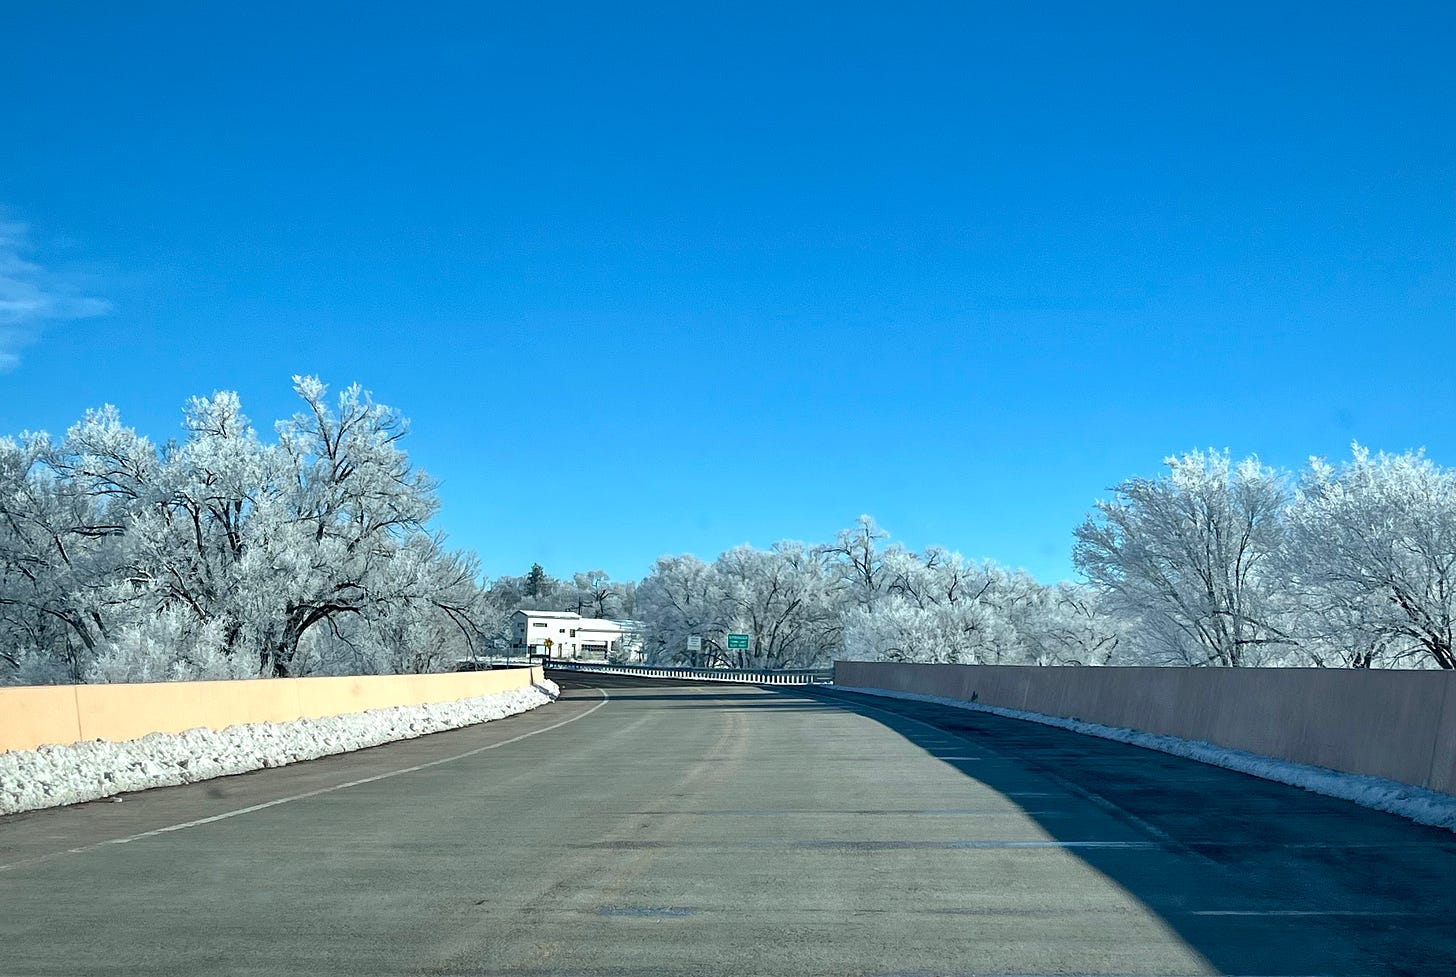 A highway is lined on both sides by trees, which are covered in frost and therefore appear to have white leaves. A while building is in the distance, and the sky is rich, bright, clear blue.